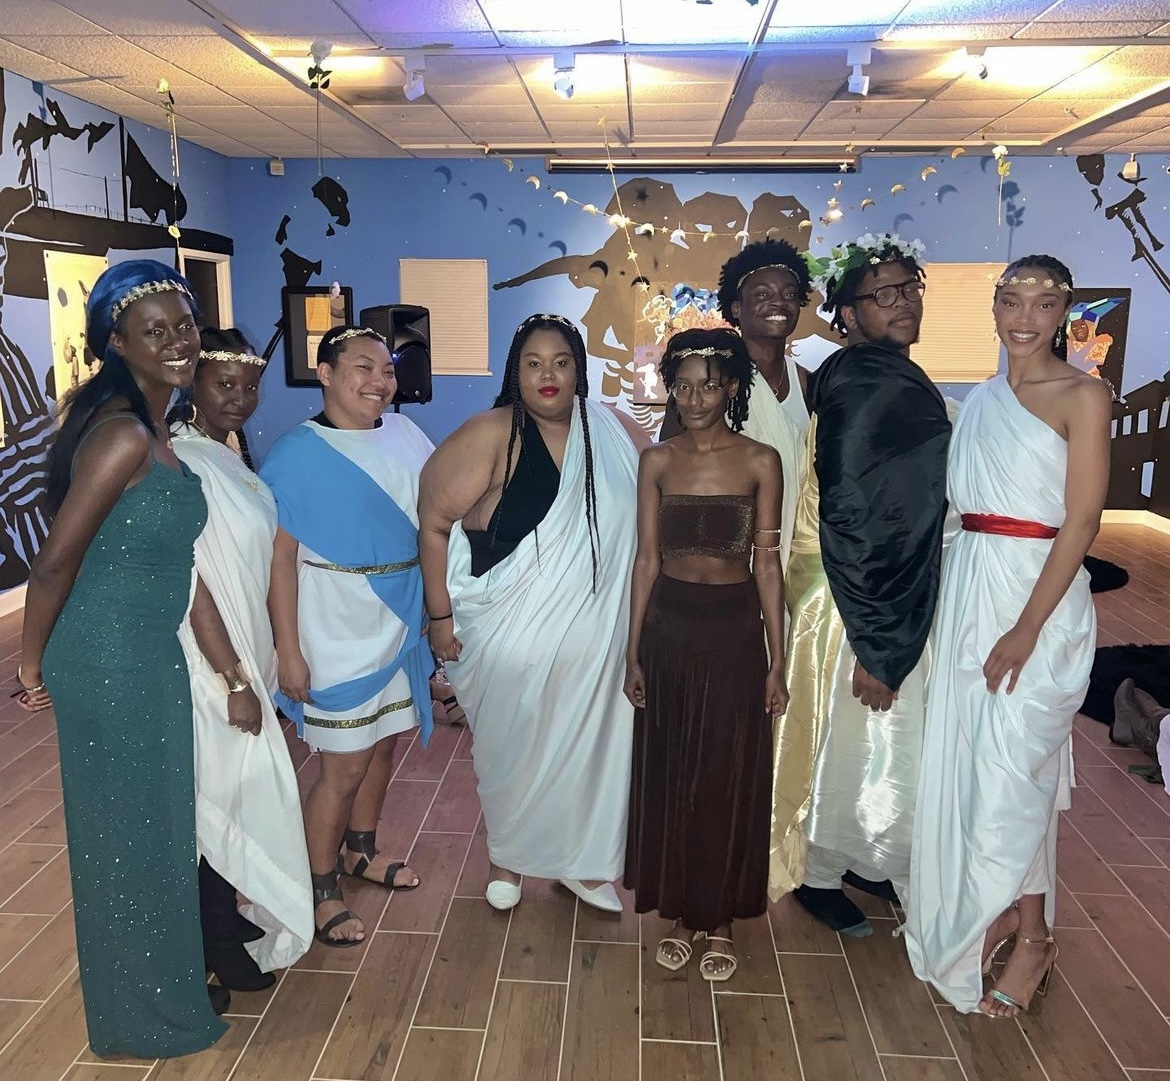 Student organization "Models of OU" dressed in Greek inspired costumes for OUMA Nights.